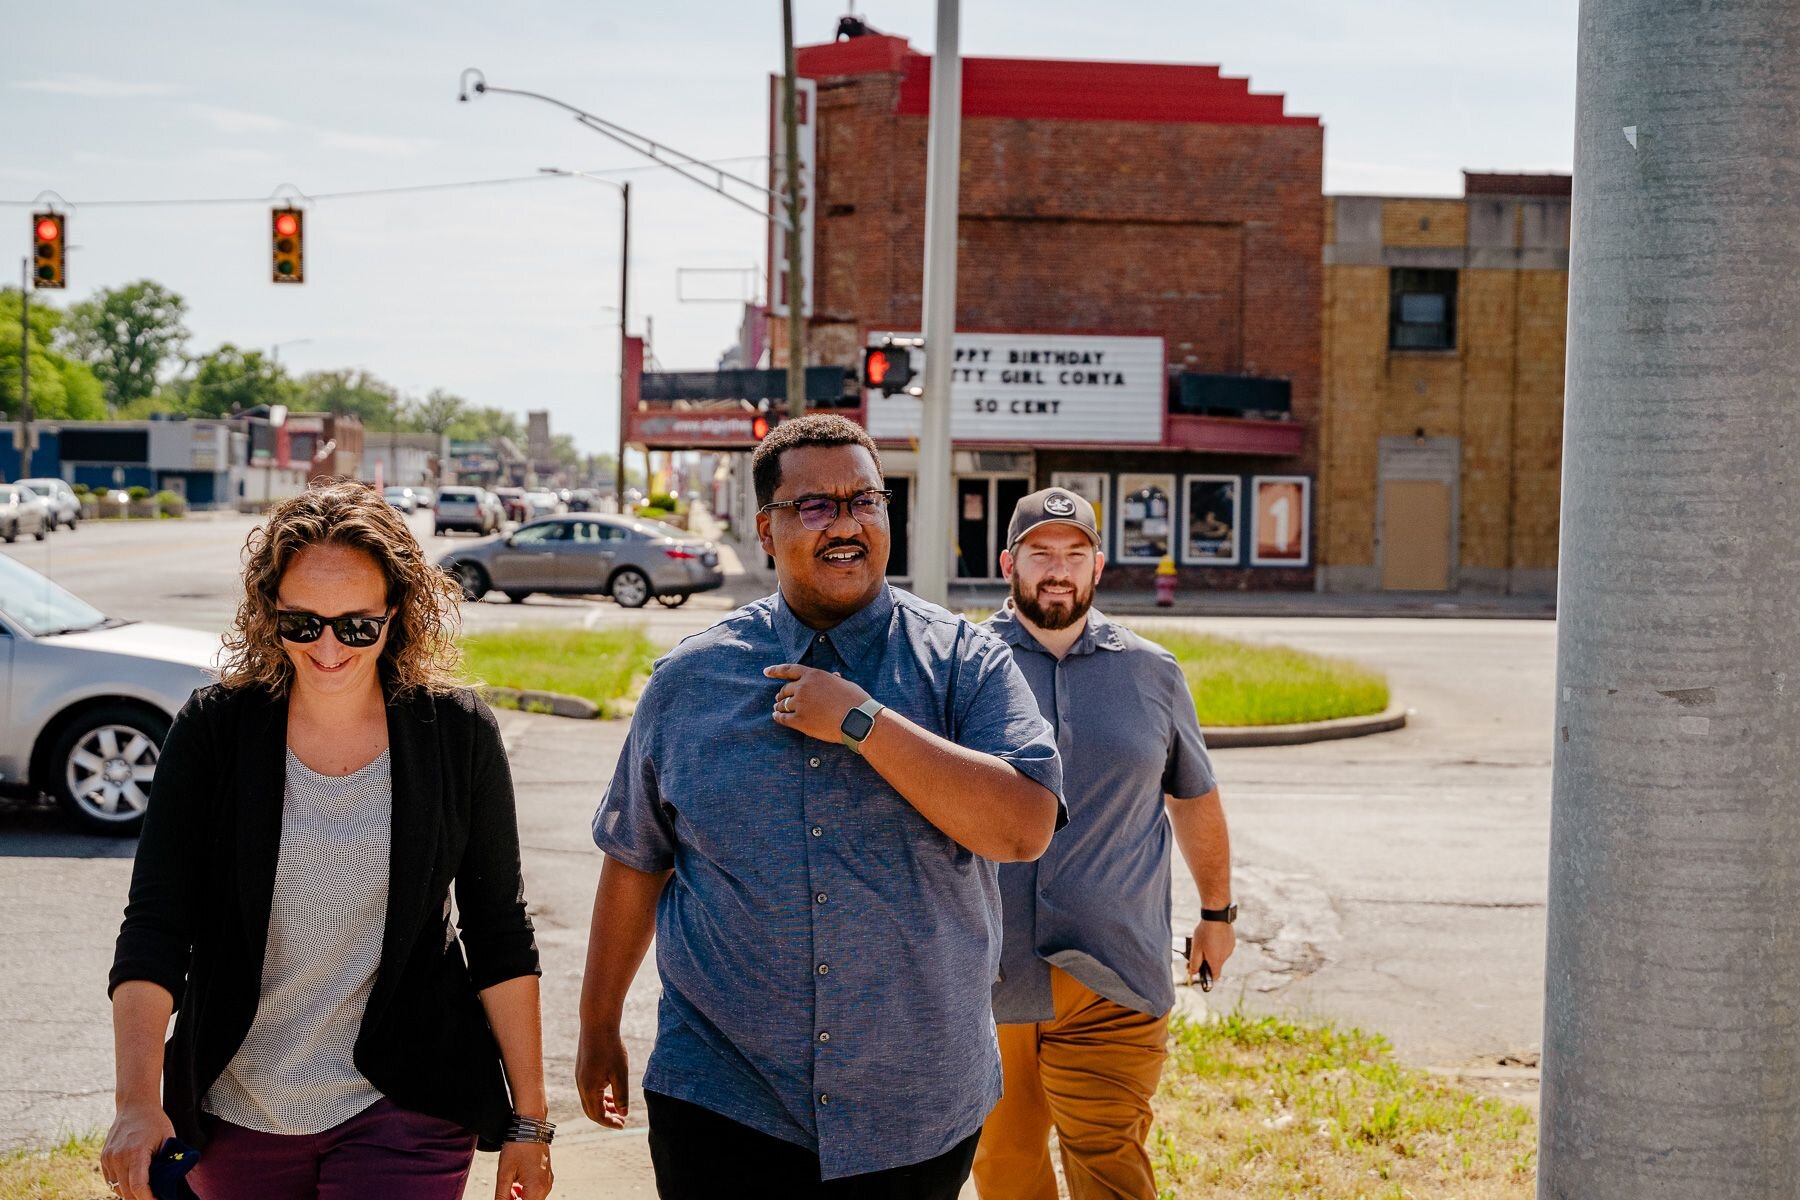 Anna Shires, with FHLBank Indianapolis, at front, walks with Jermaine Ruffin, with the city of Detroit, and Joe Rashid, with the East Warren EDC.